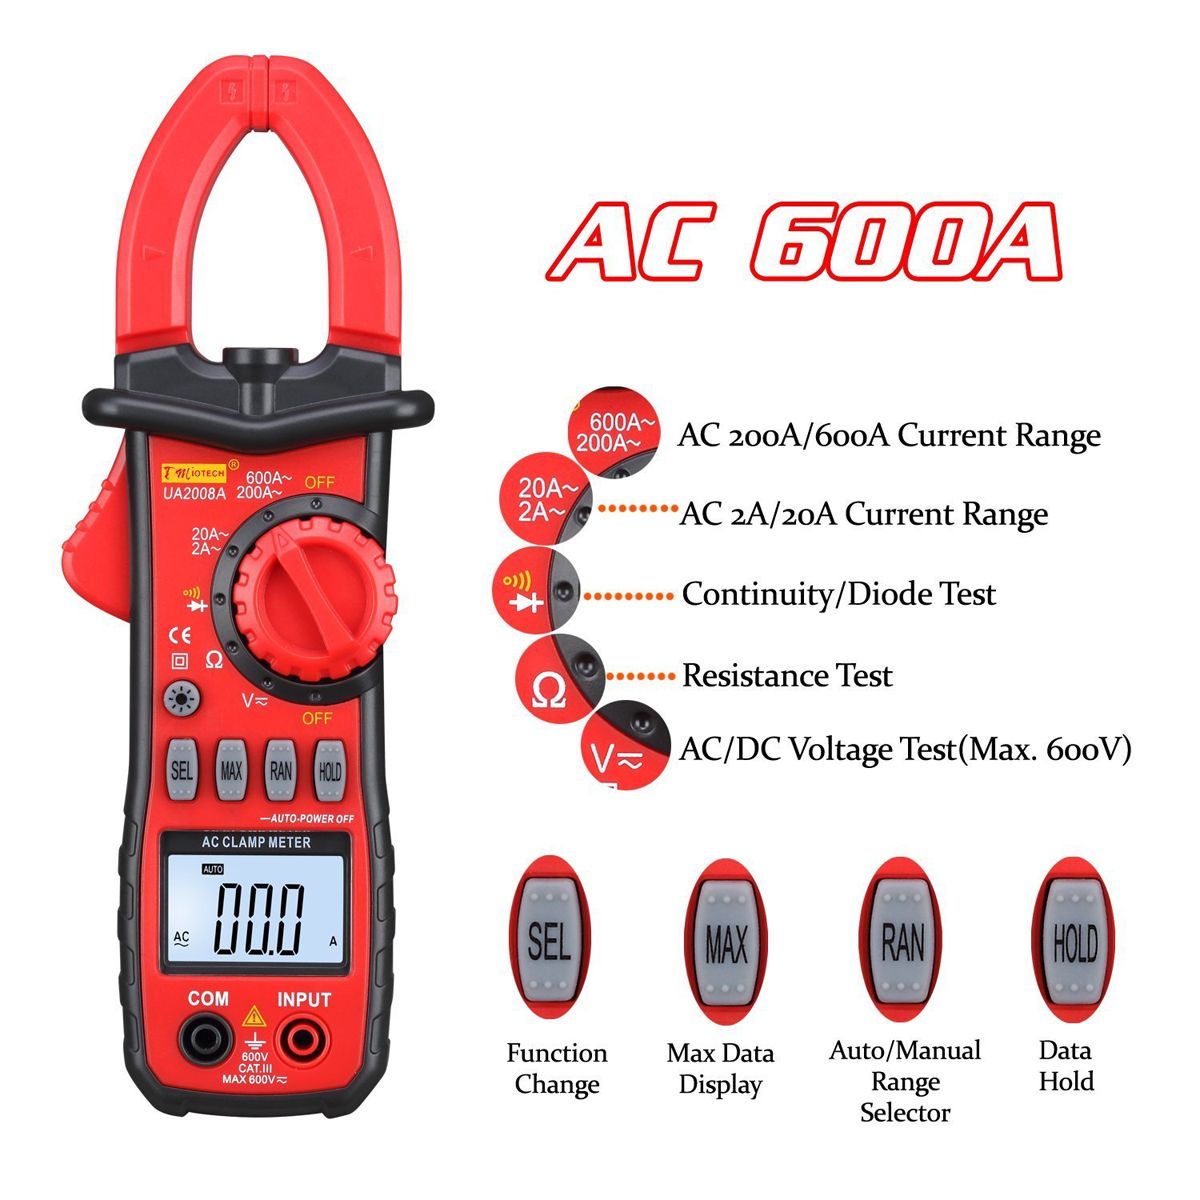 UA2008A-Handheld-Dual-Open-Digital-Clamp-Multimeter-ACDC-Voltage-Test-Probes-1244368